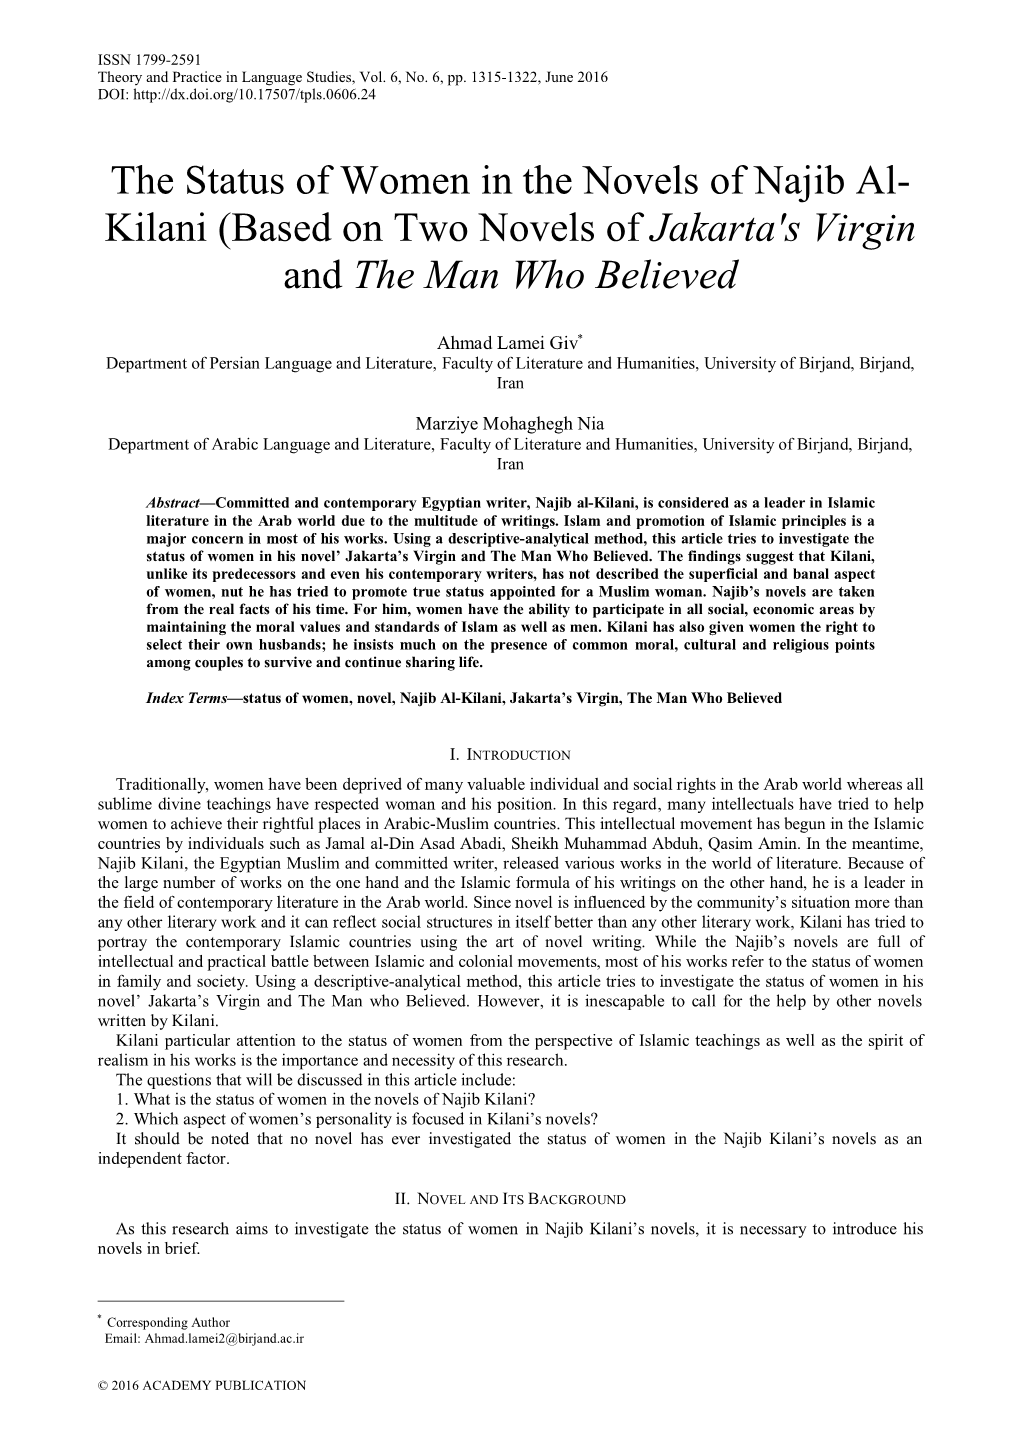 The Status of Women in the Novels of Najib Al- Kilani (Based on Two Novels of Jakarta's Virgin and the Man Who Believed